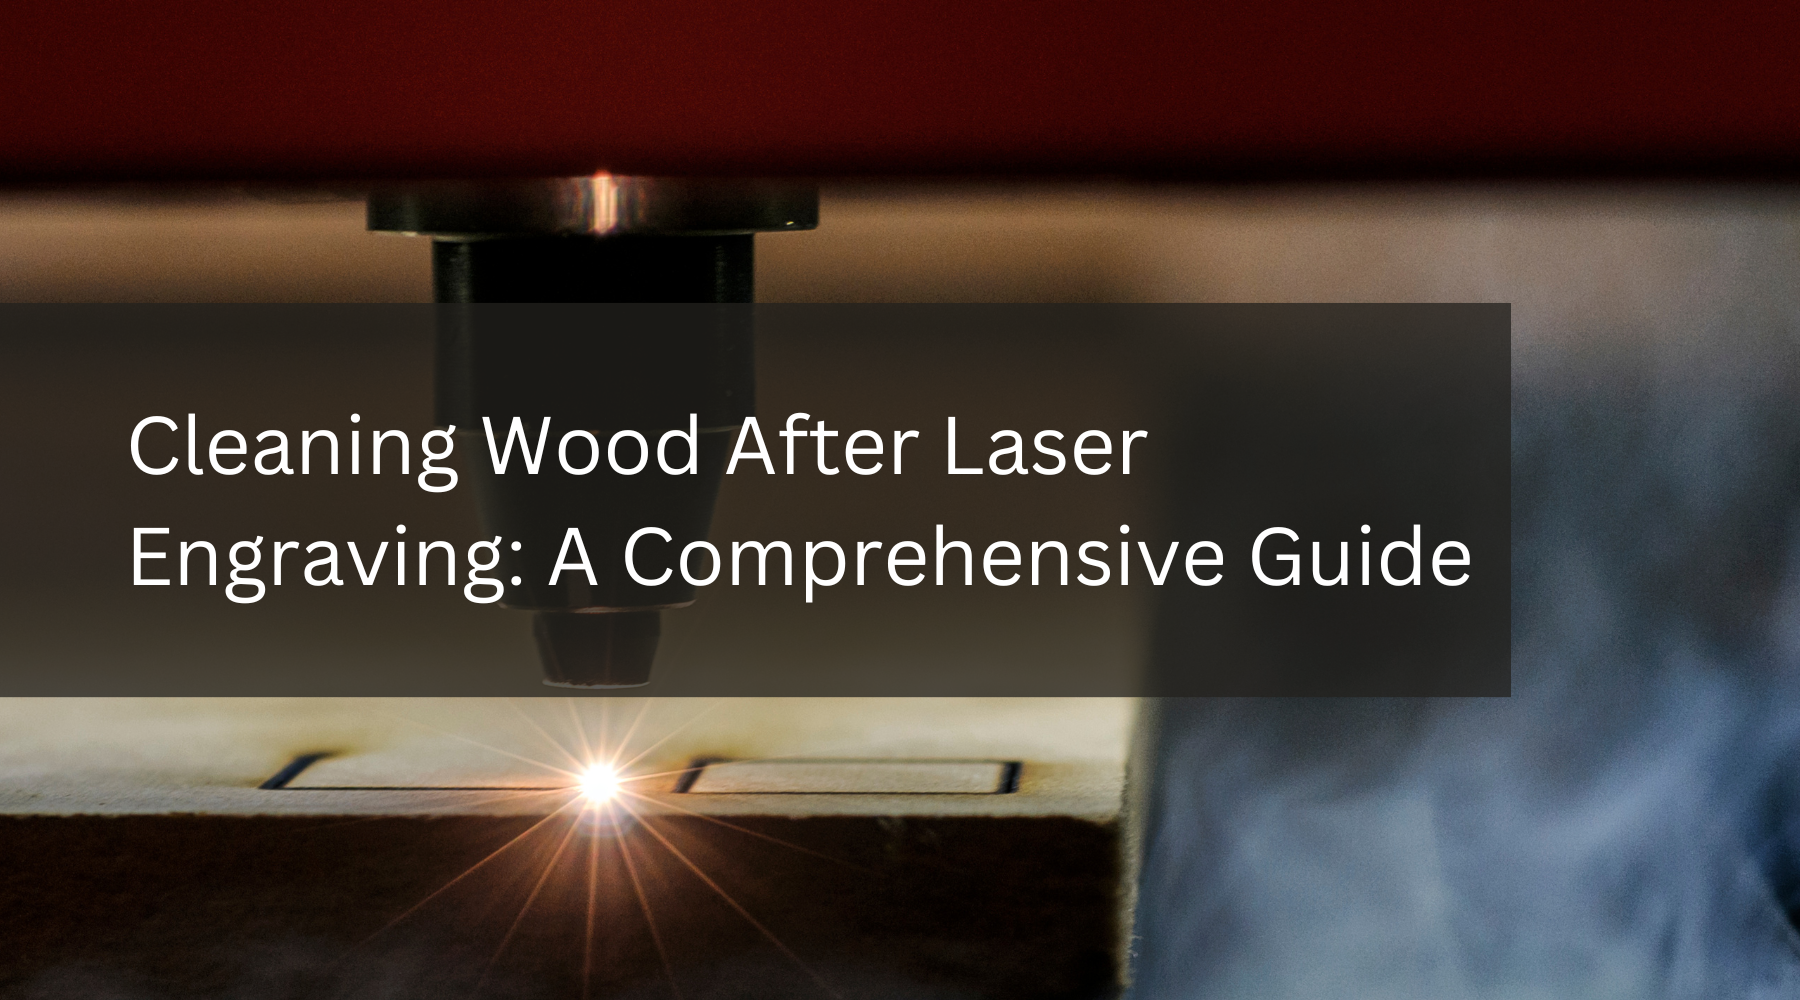 Cleaning Wood After Laser Engraving: A Comprehensive Guide